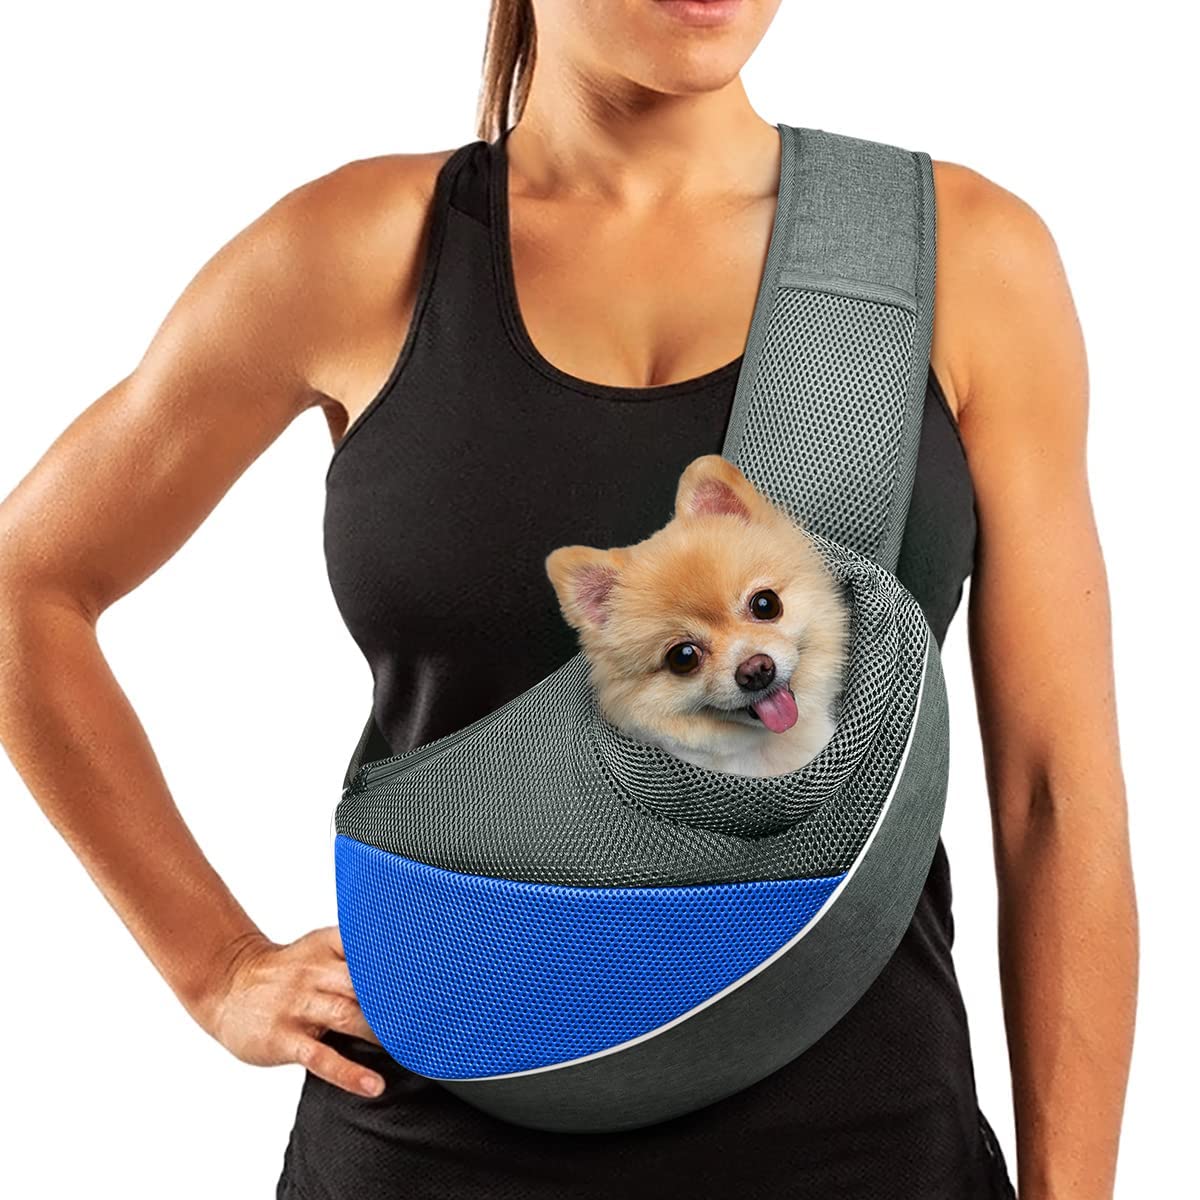 AOFOOK Dog Sling carrier, Adjustable Puppy Pet carrier Purse carrier Dog carrying Bag Small Animal carriers cat Sling Pouch Hold